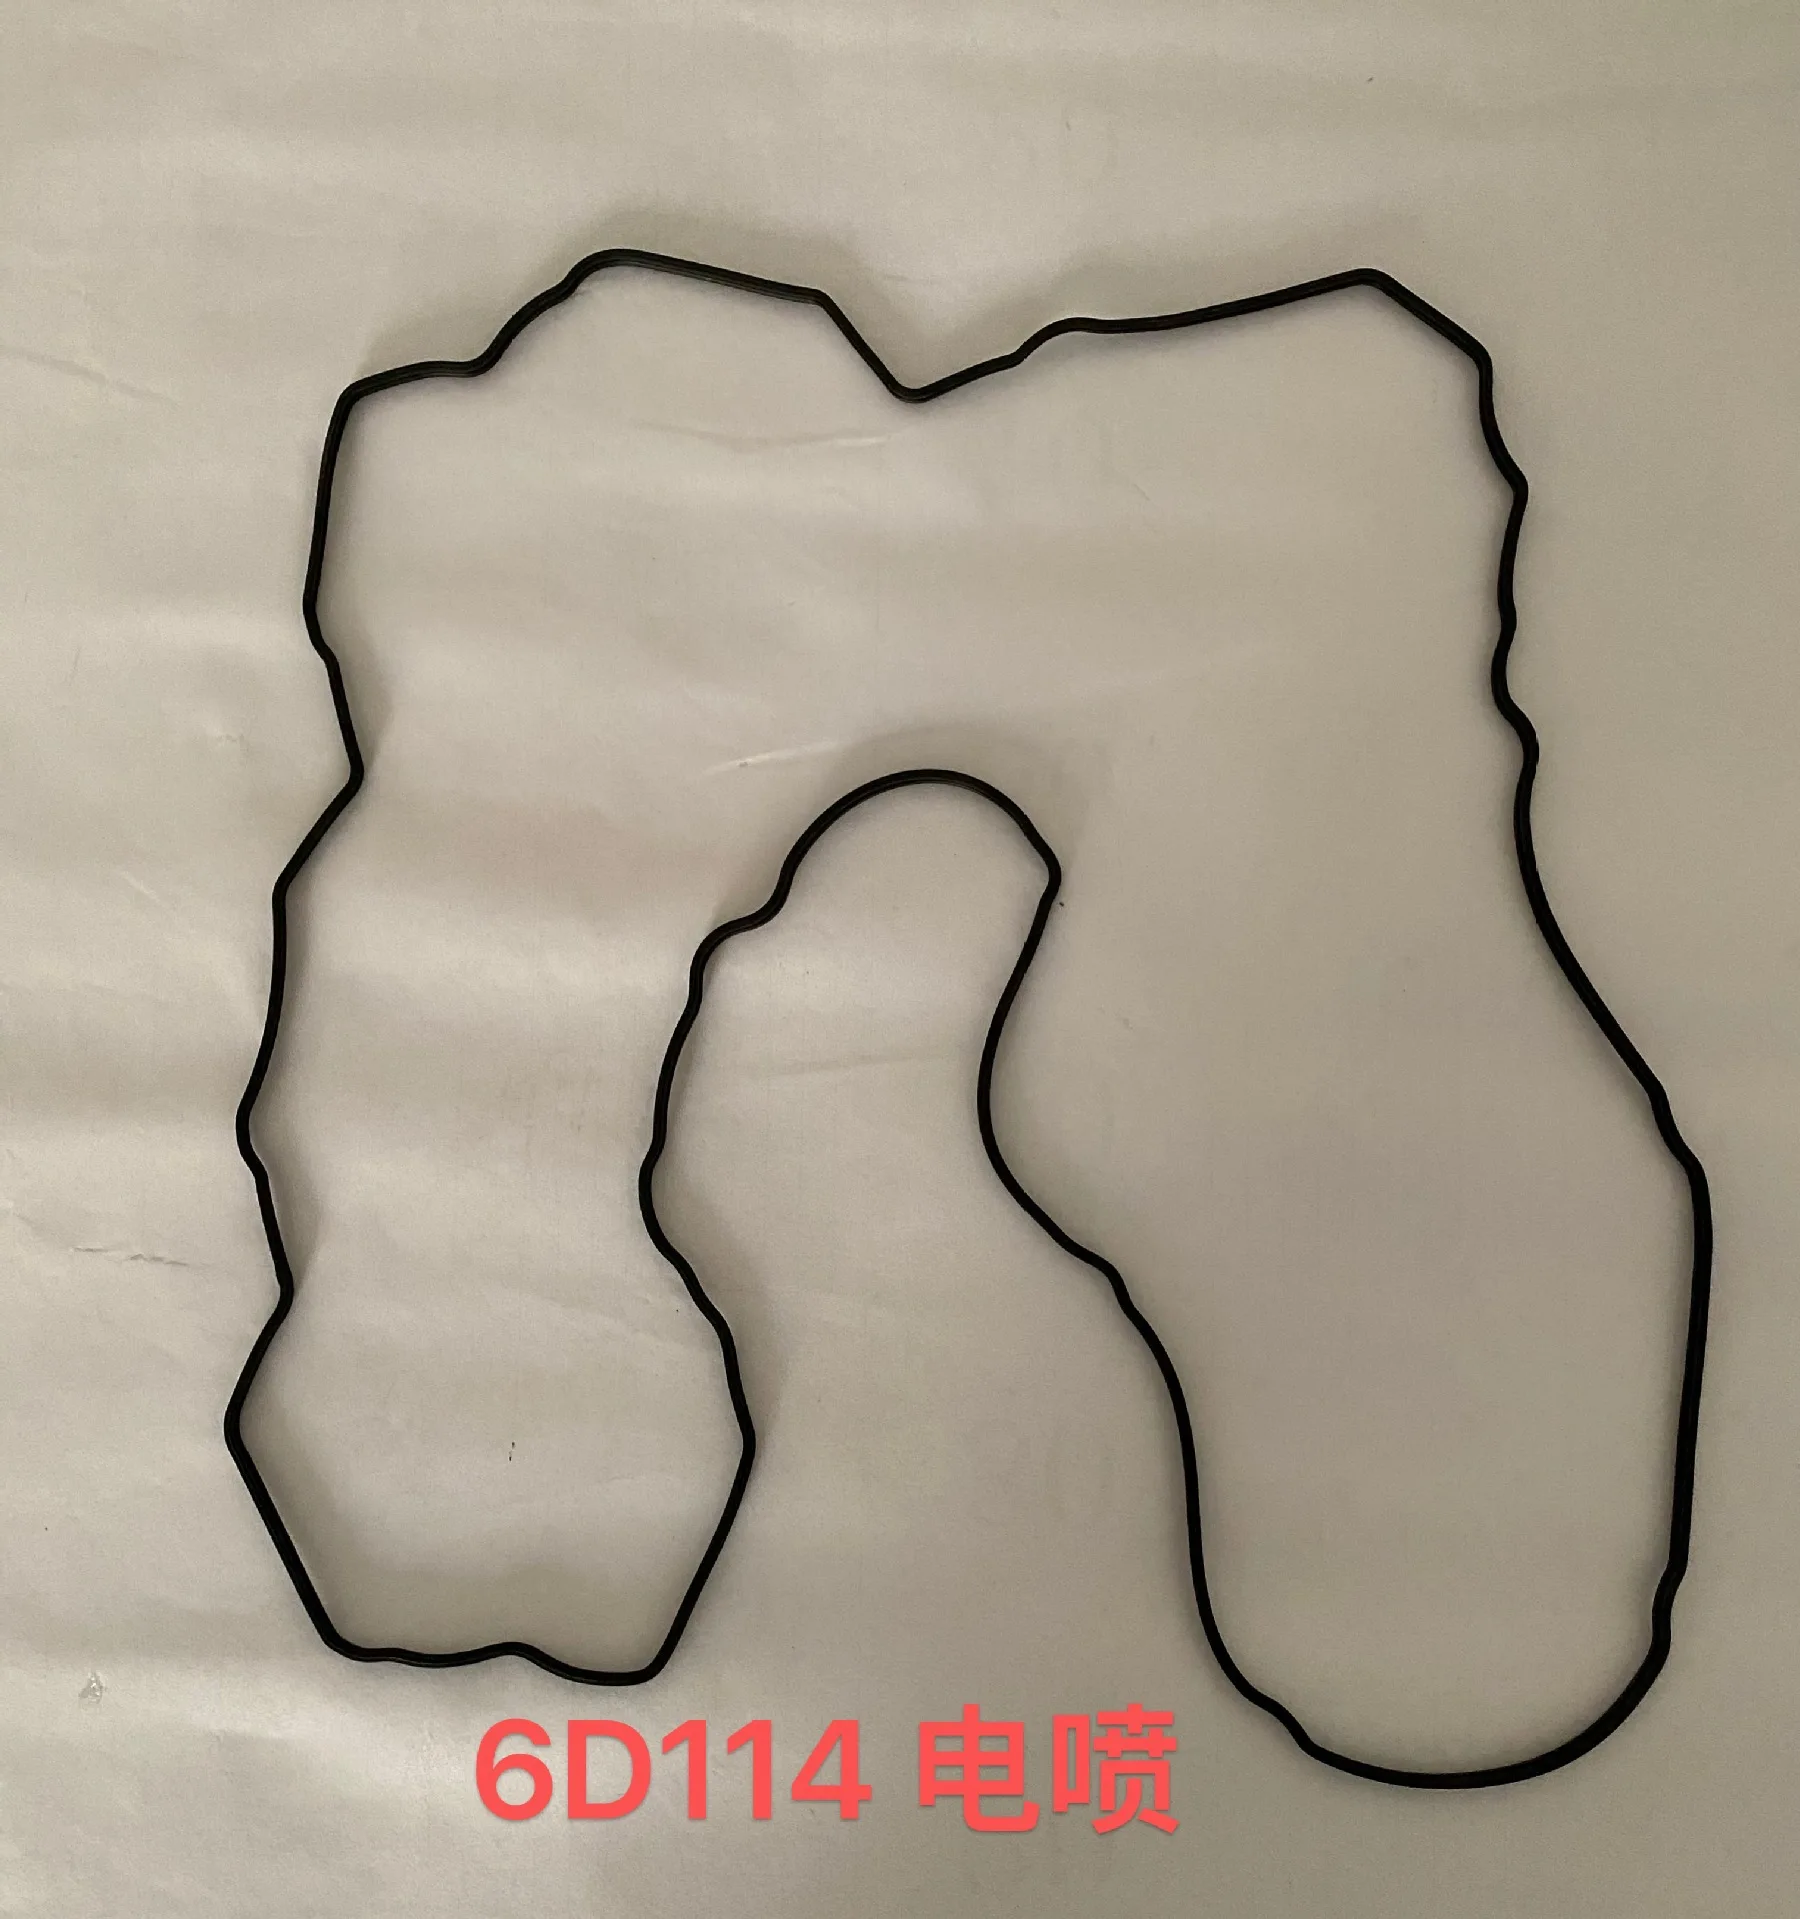 

Excavator 6D114 engine electronic injection timing rubber strip 6754-11-7810 sealant strip accessories gasket parts